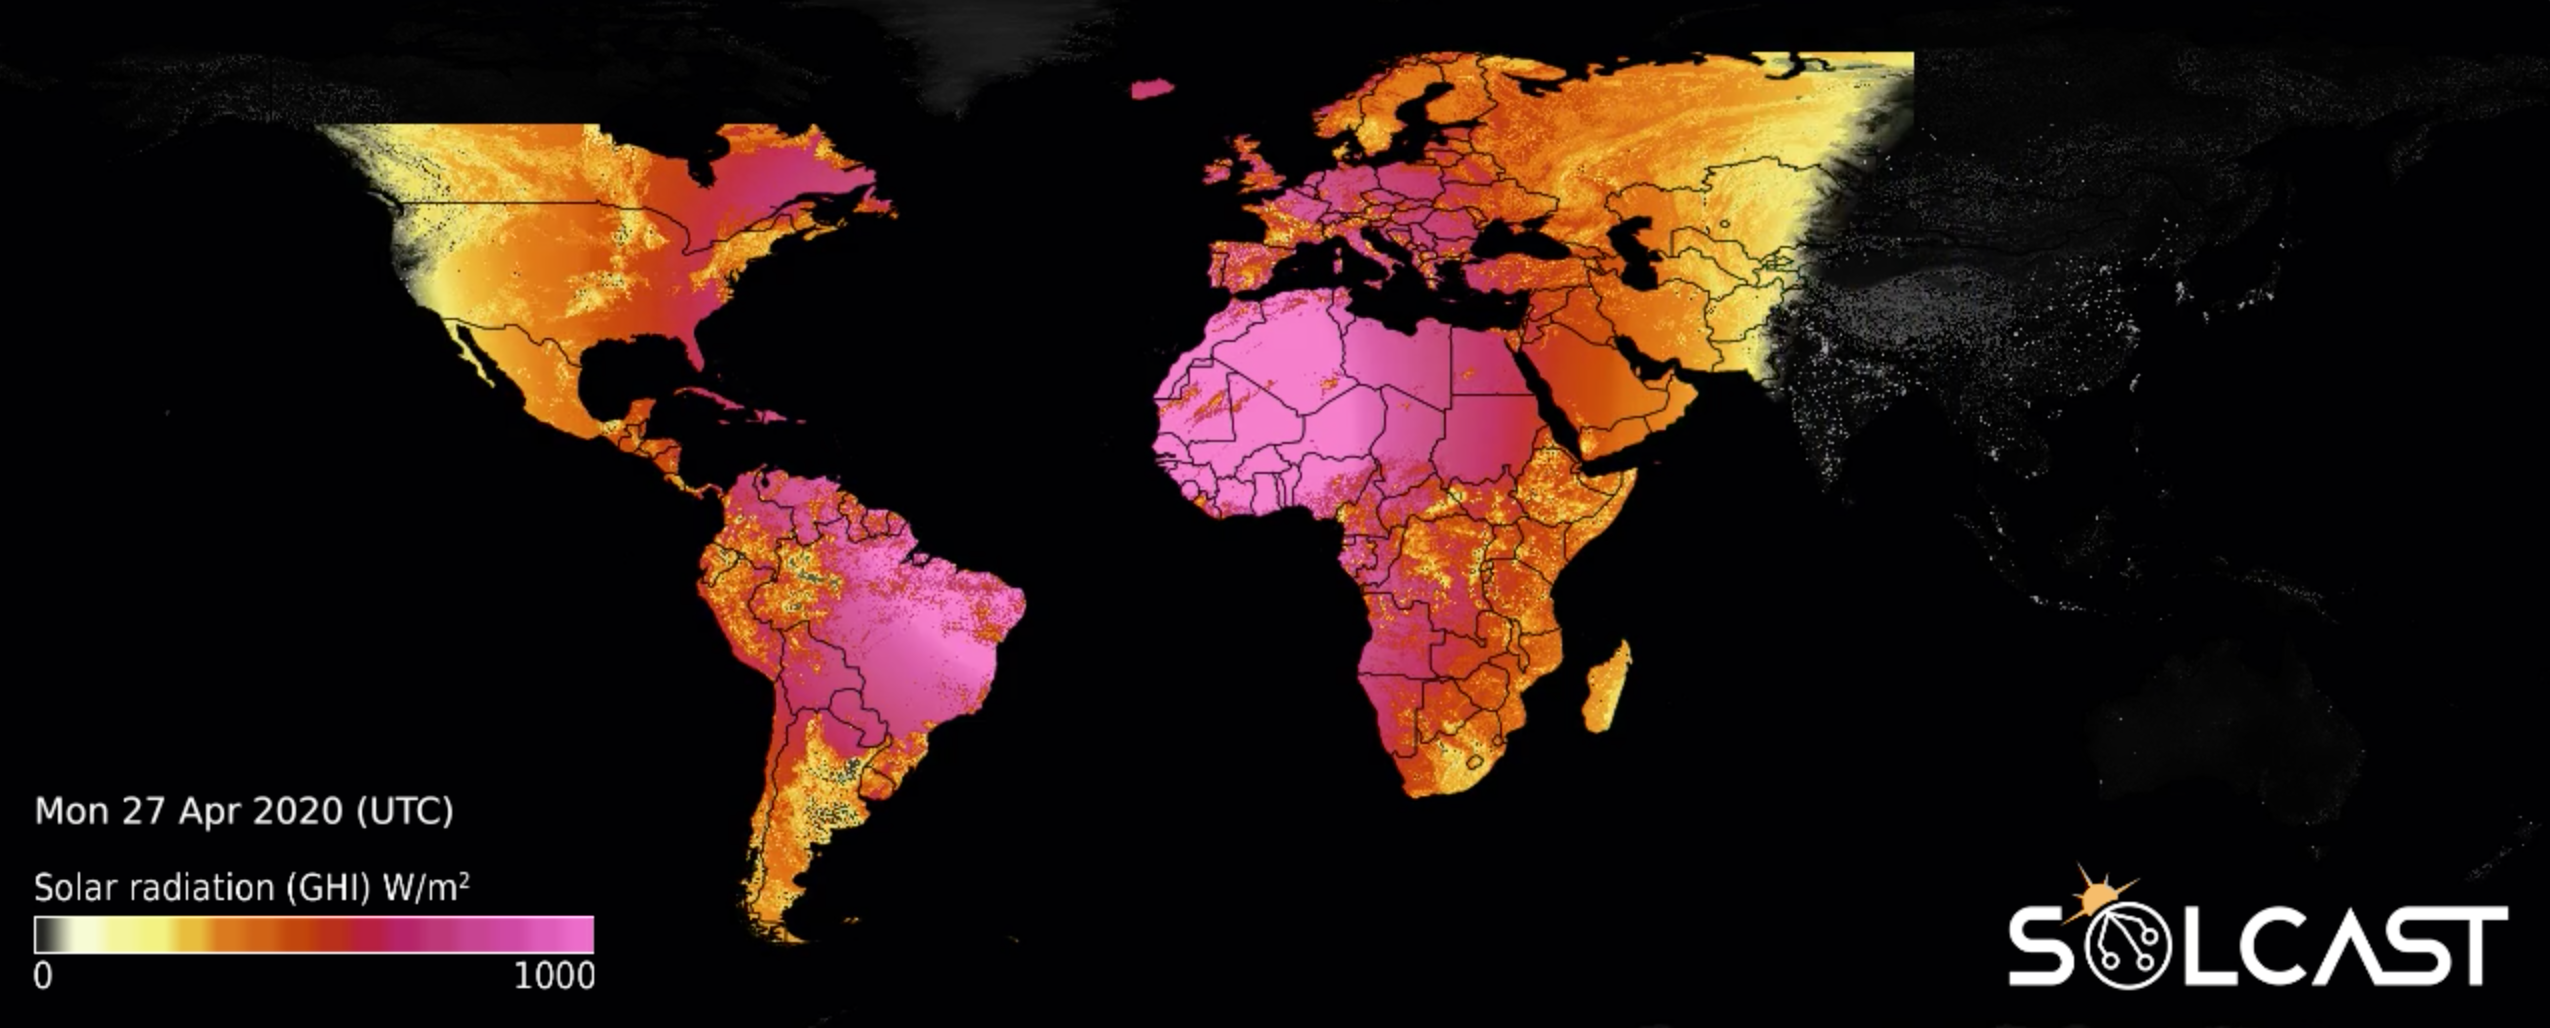 Browsable global solar radiation maps are live